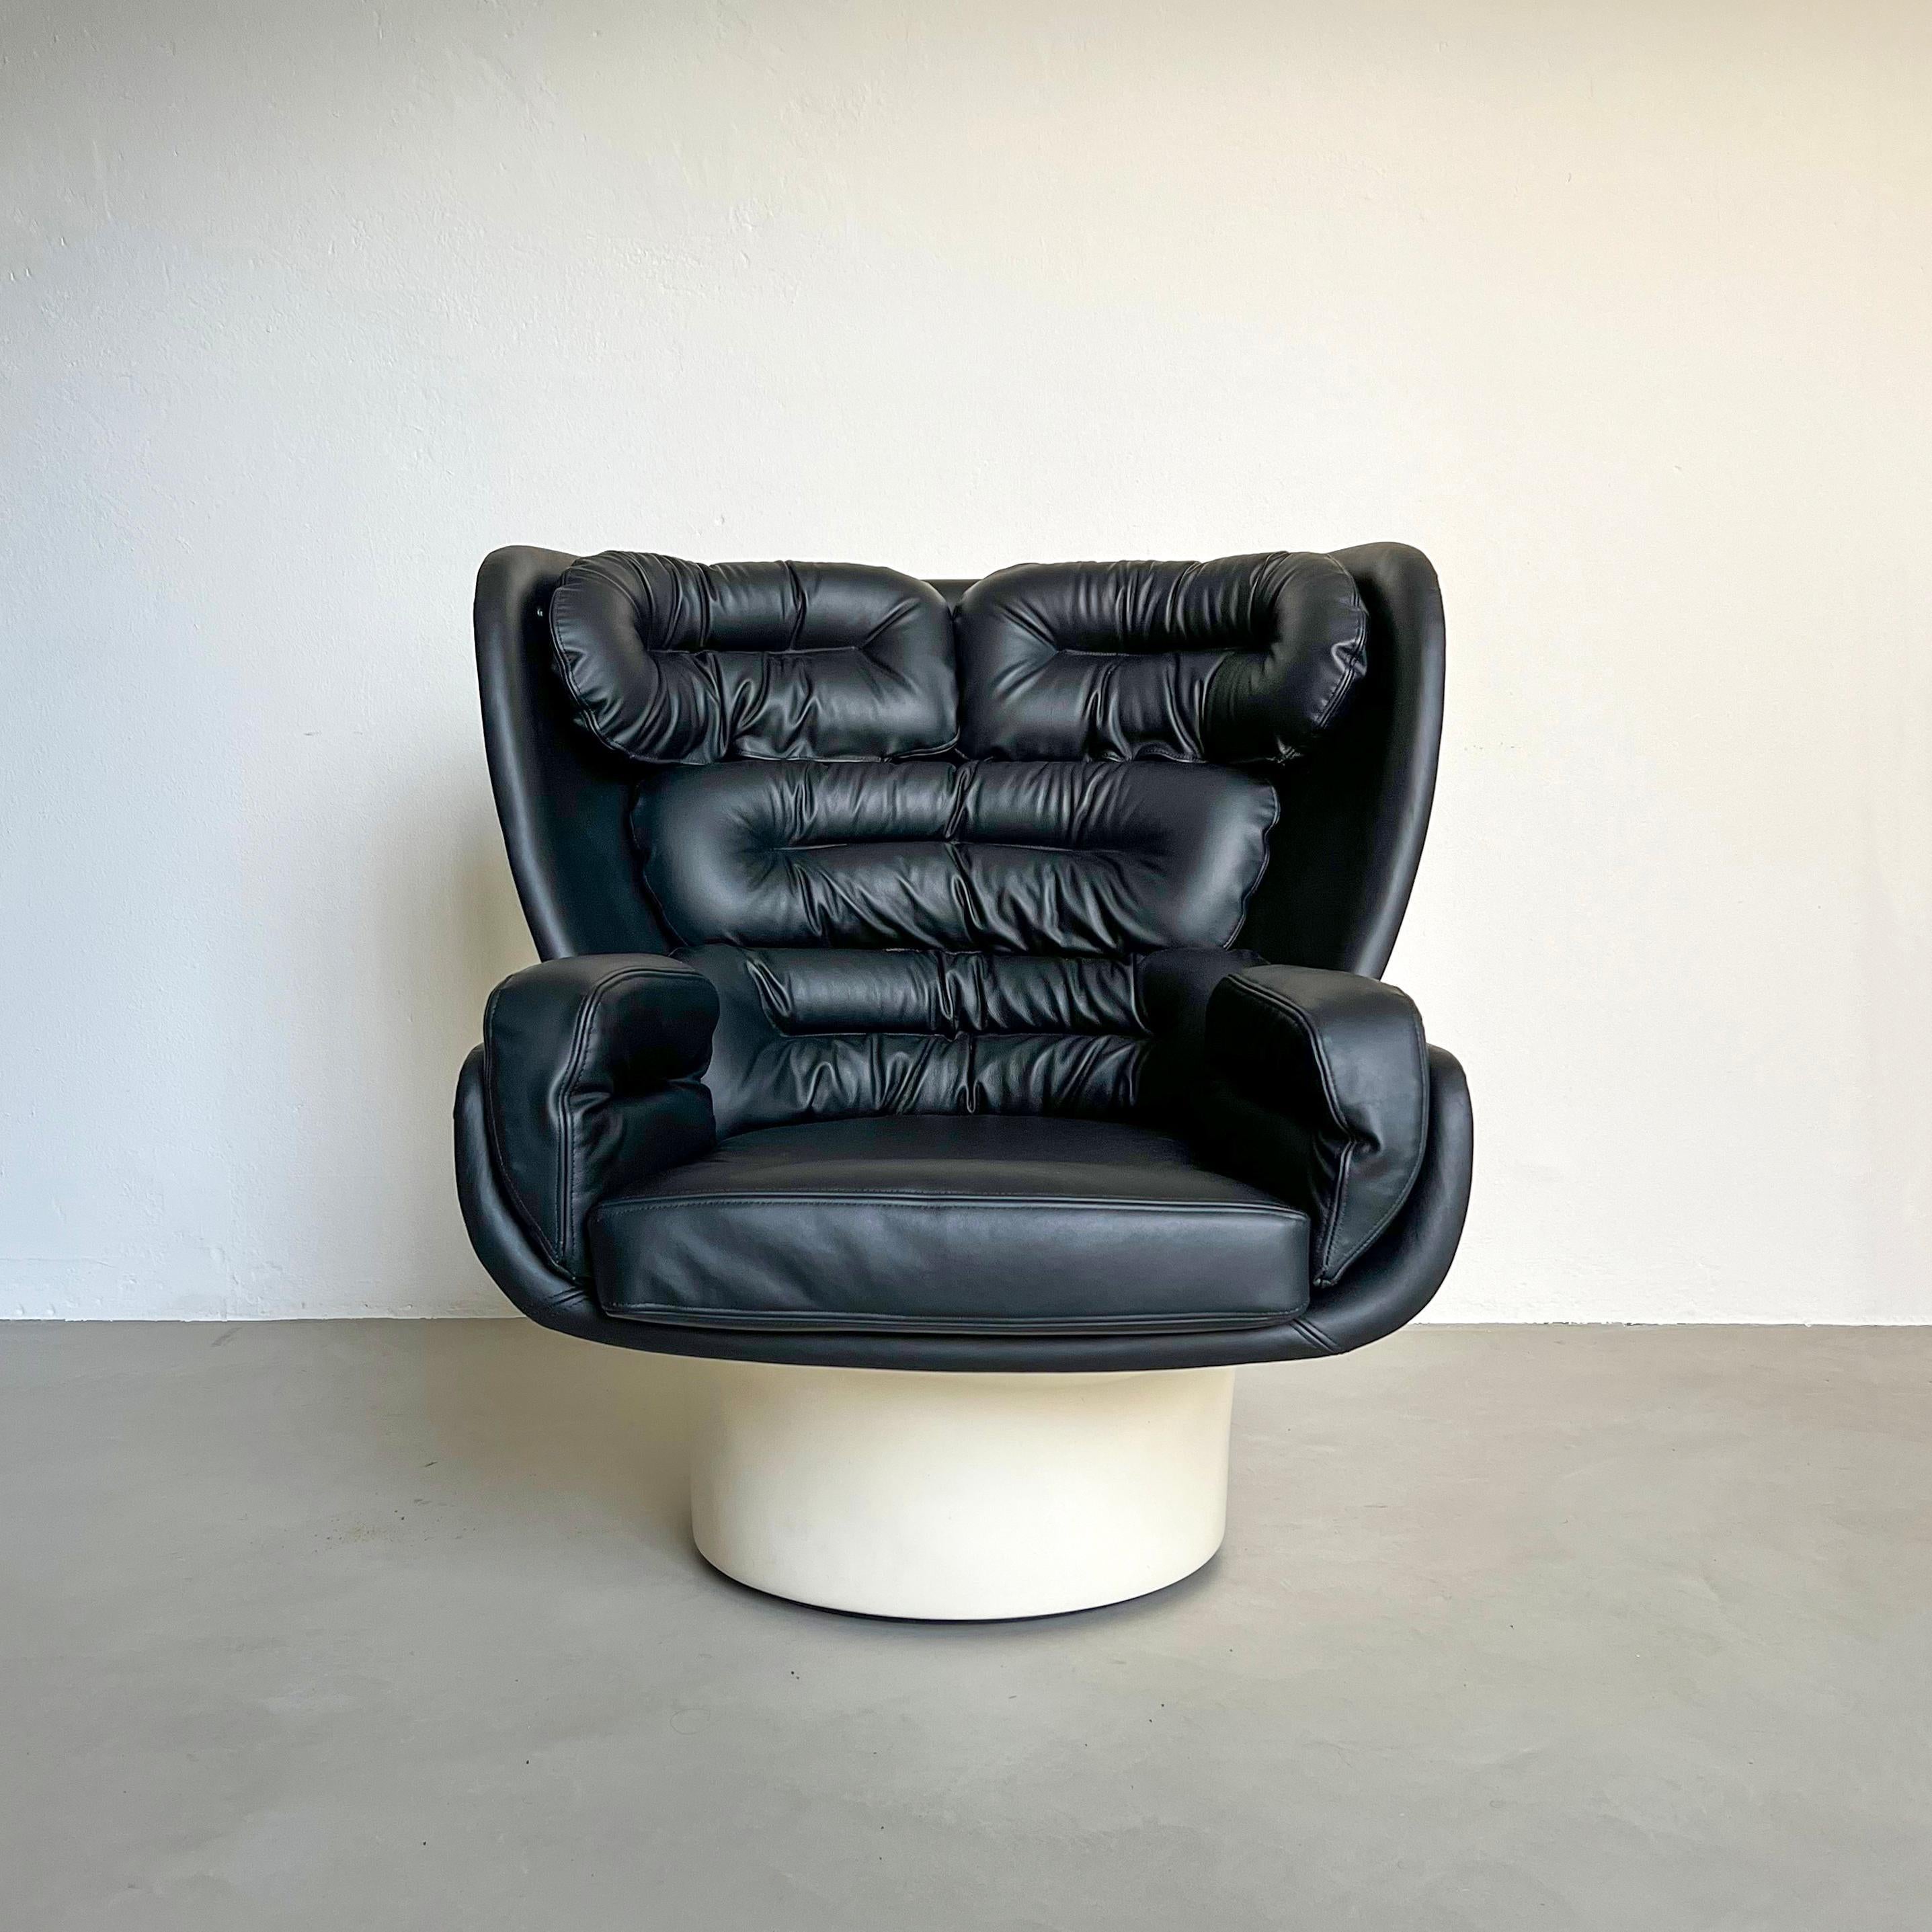 Space Age Living Room Armchair, Elda by Joe Colombo, Black Leather, Collectible For Sale 2